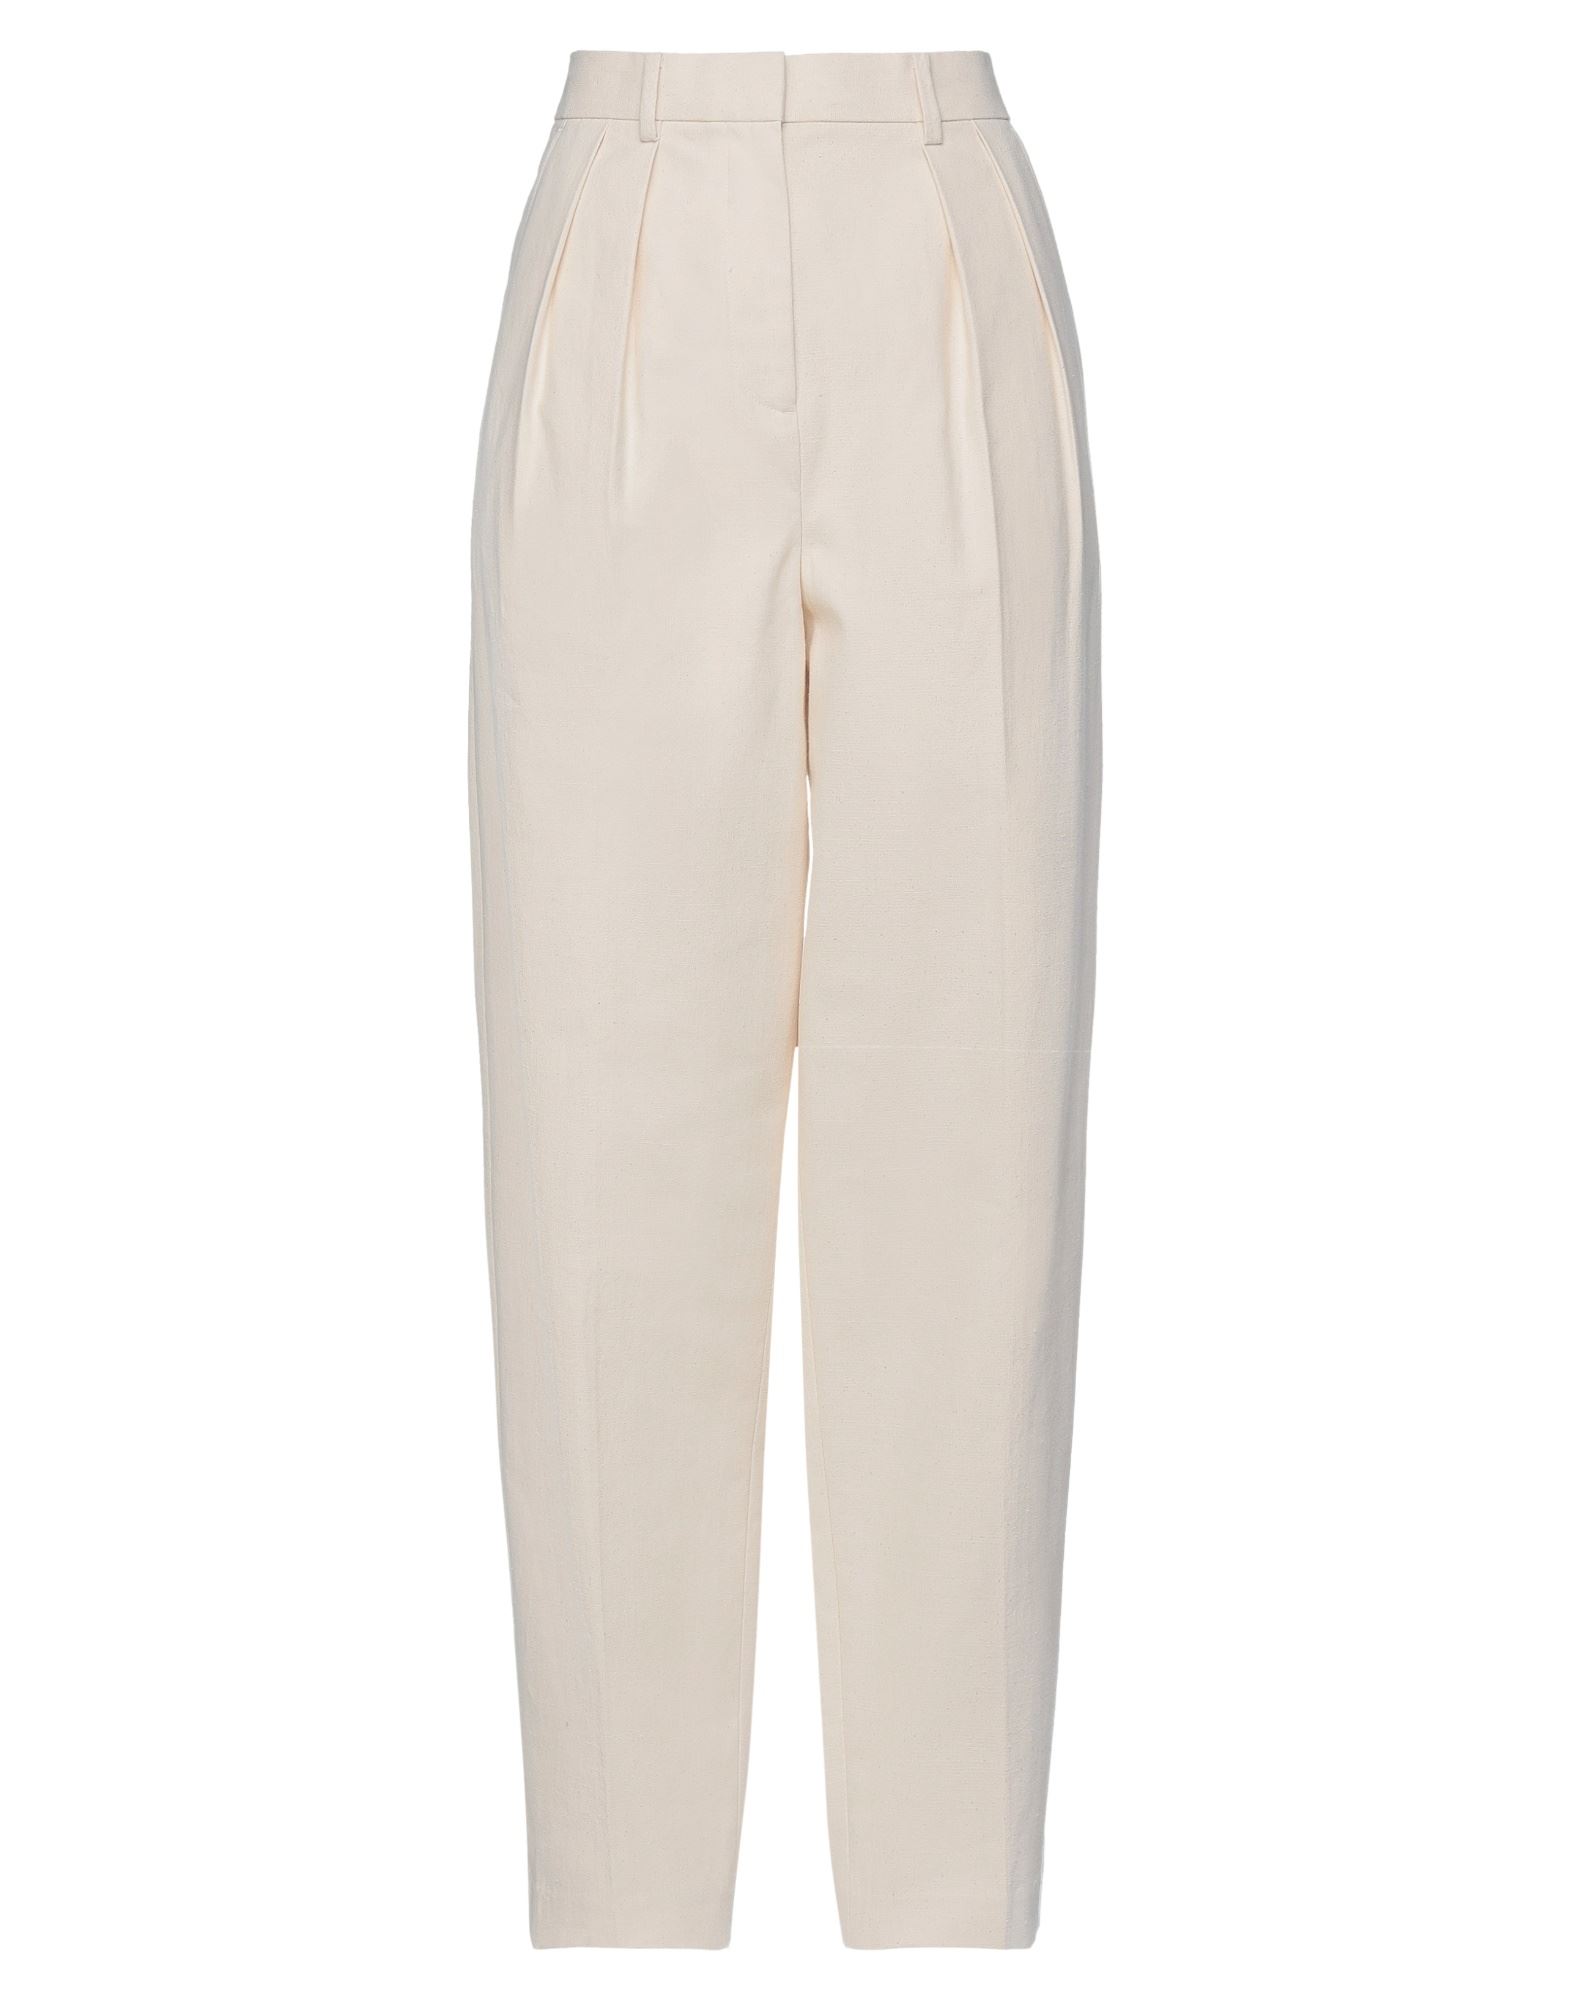 Tory Burch Pants In Ivory | ModeSens